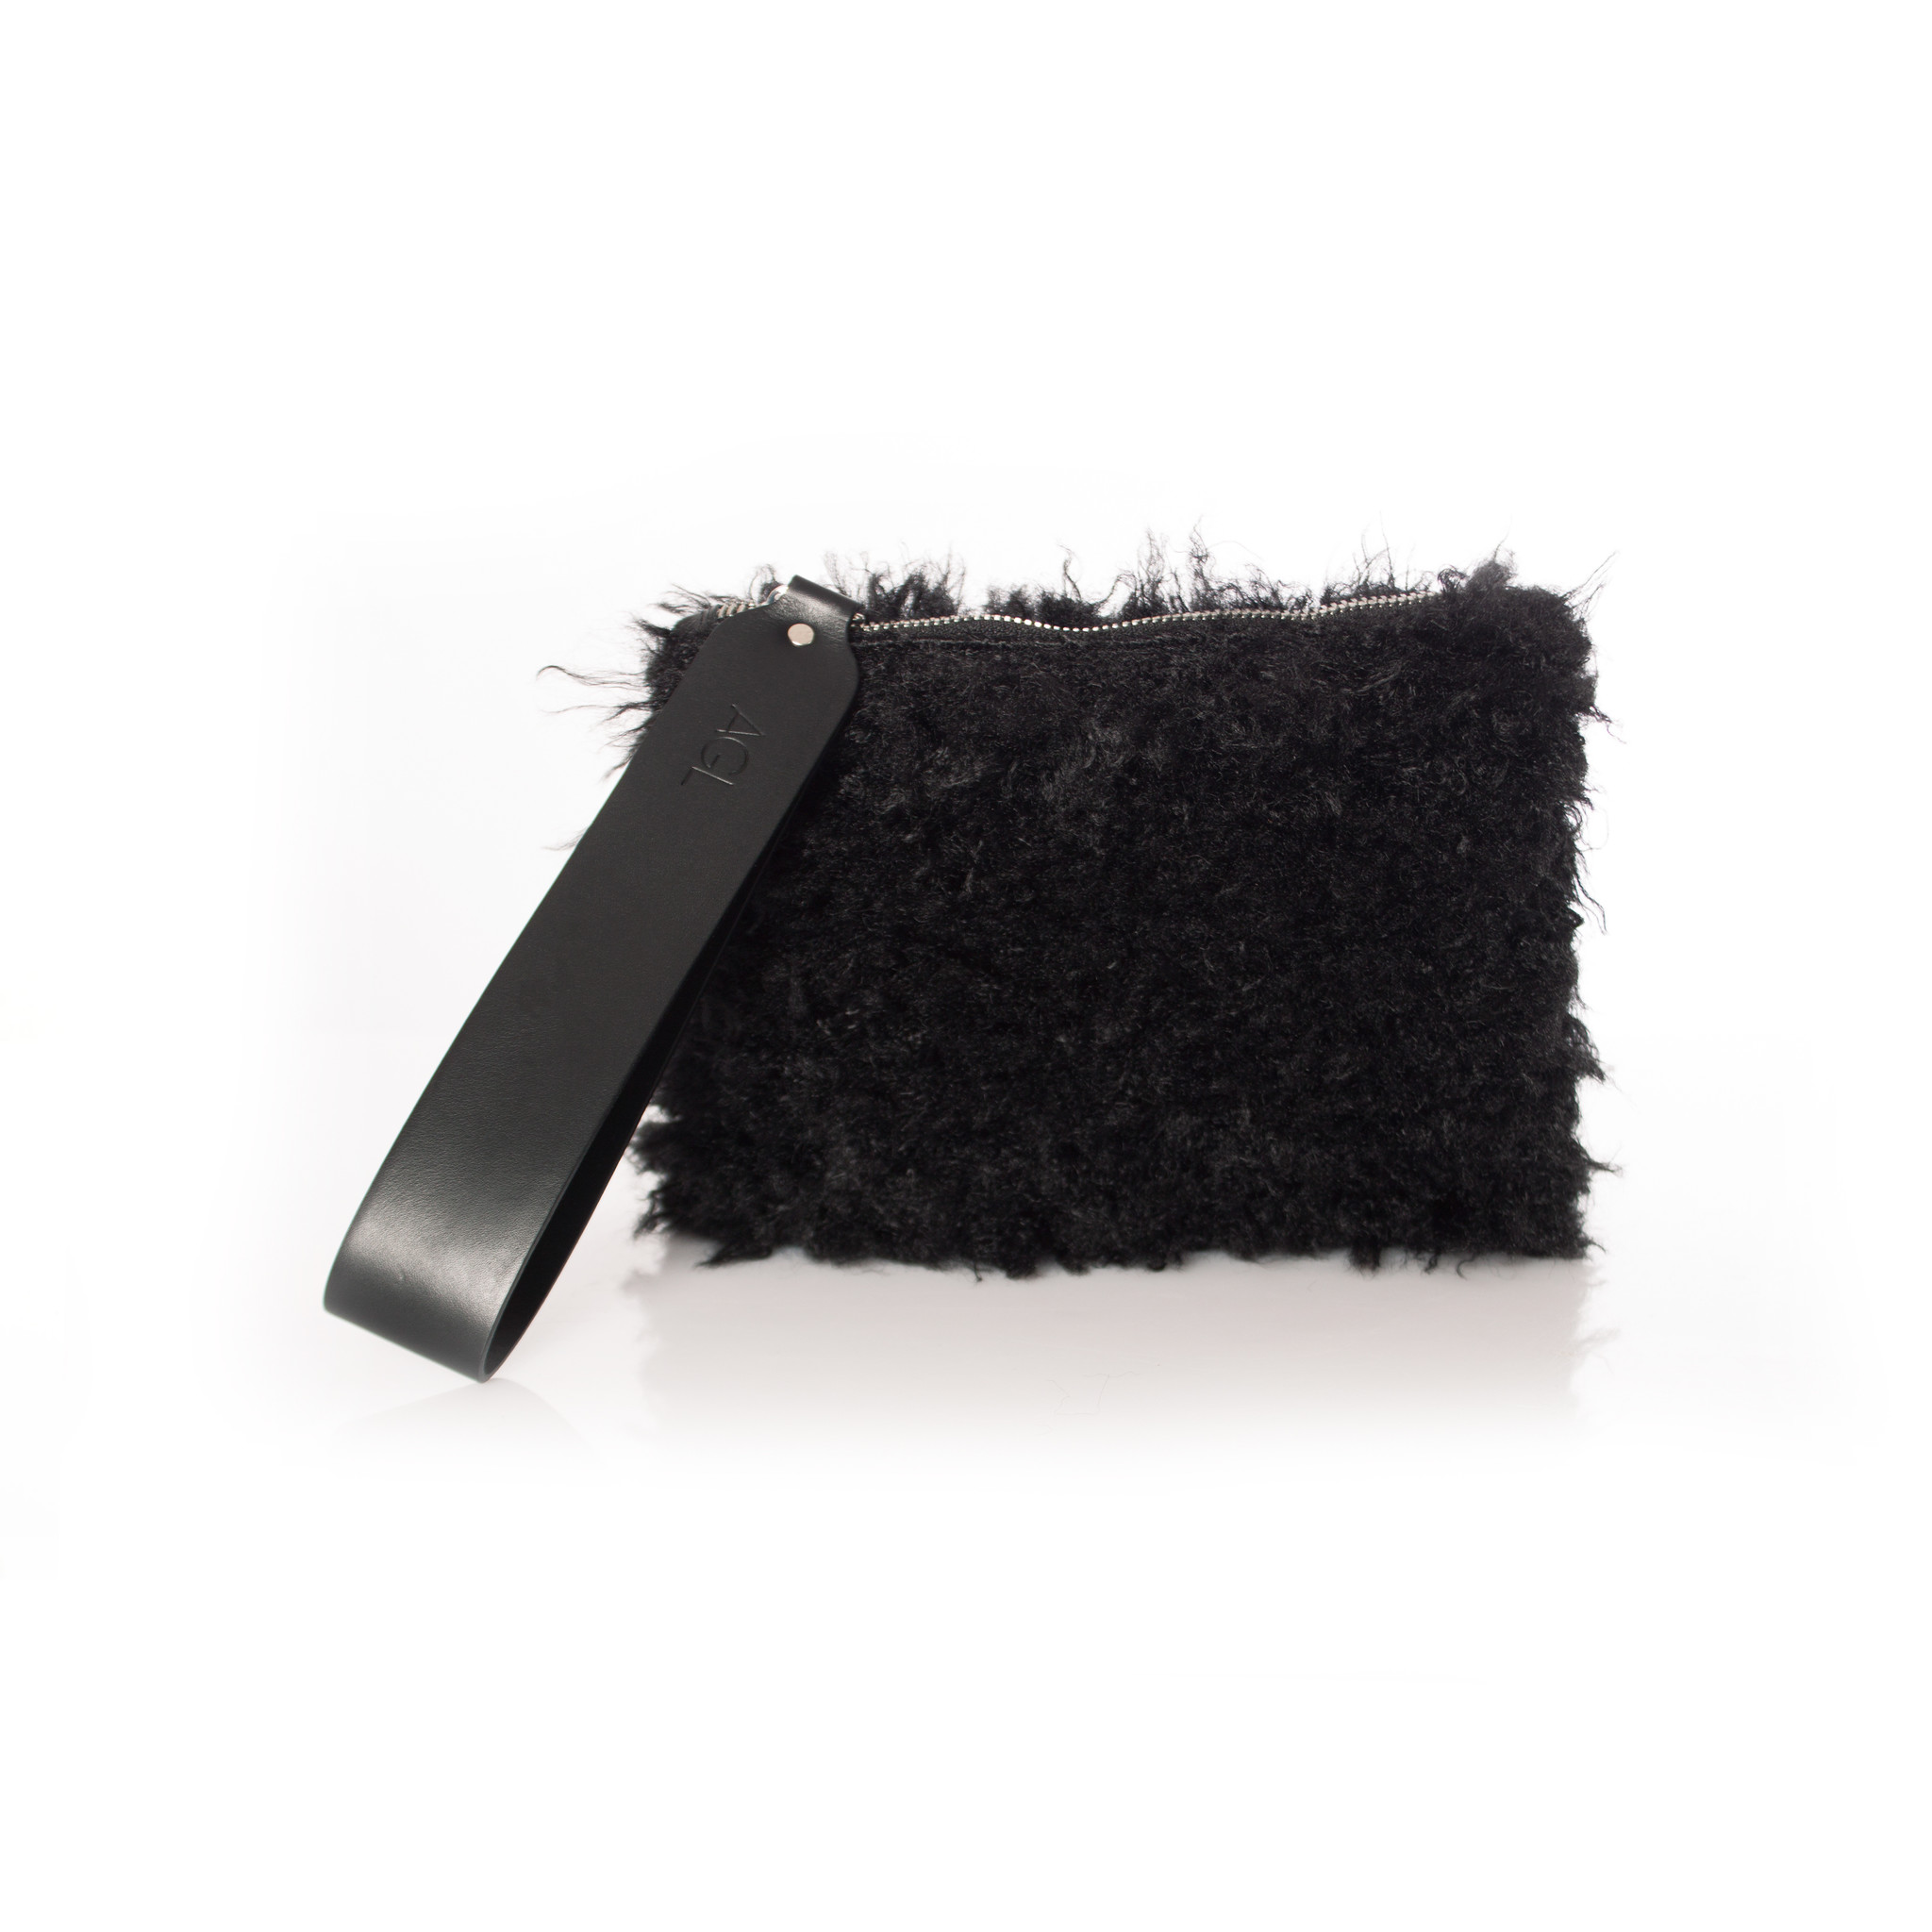 Black Grained leather pouch Bag – Carlos Campos New York